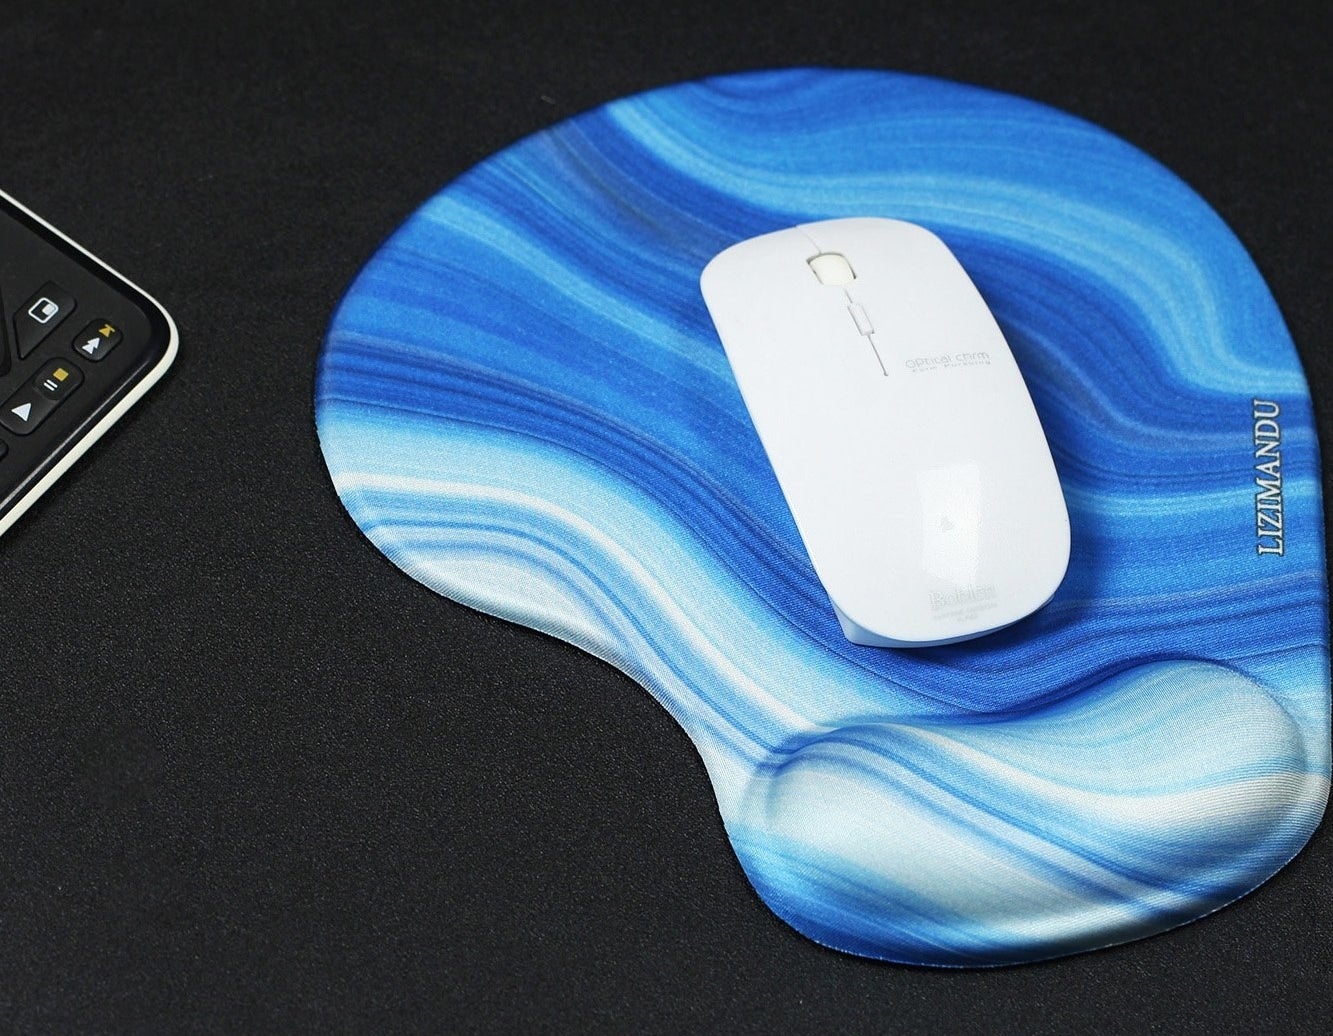 the blue mouse pad